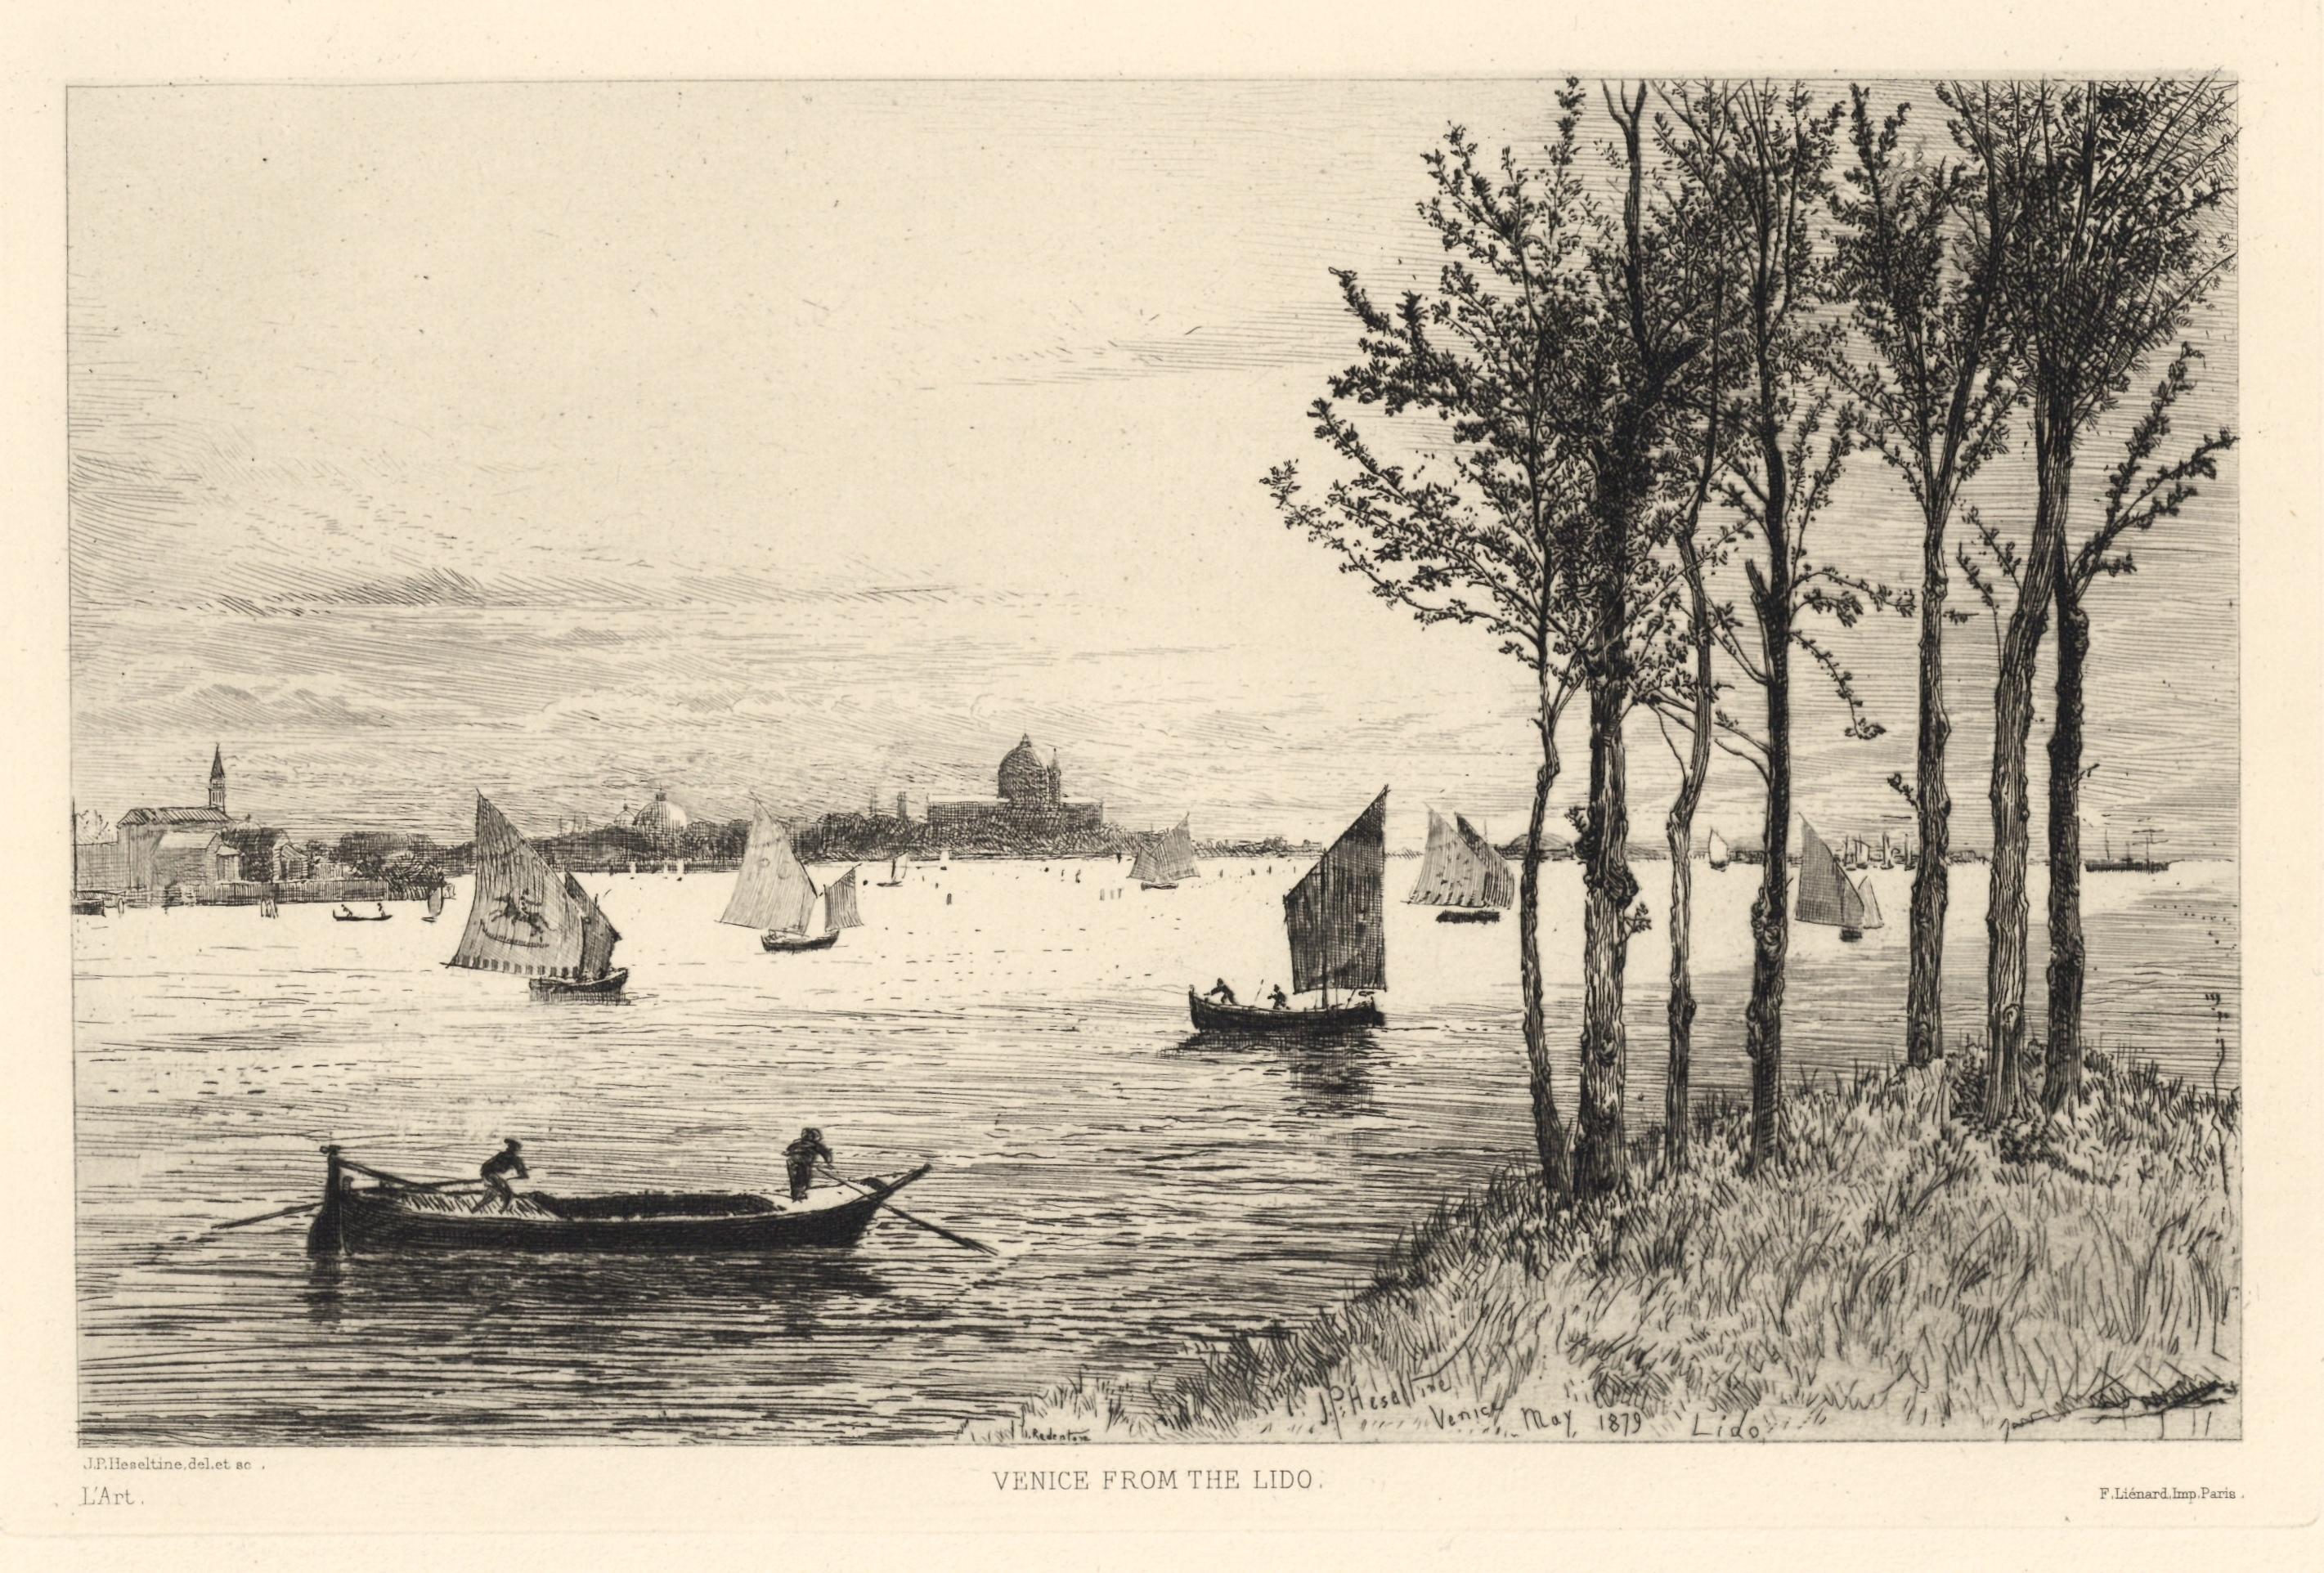 "Venice from the Lido" original etching - Print by John Postle Heseltine